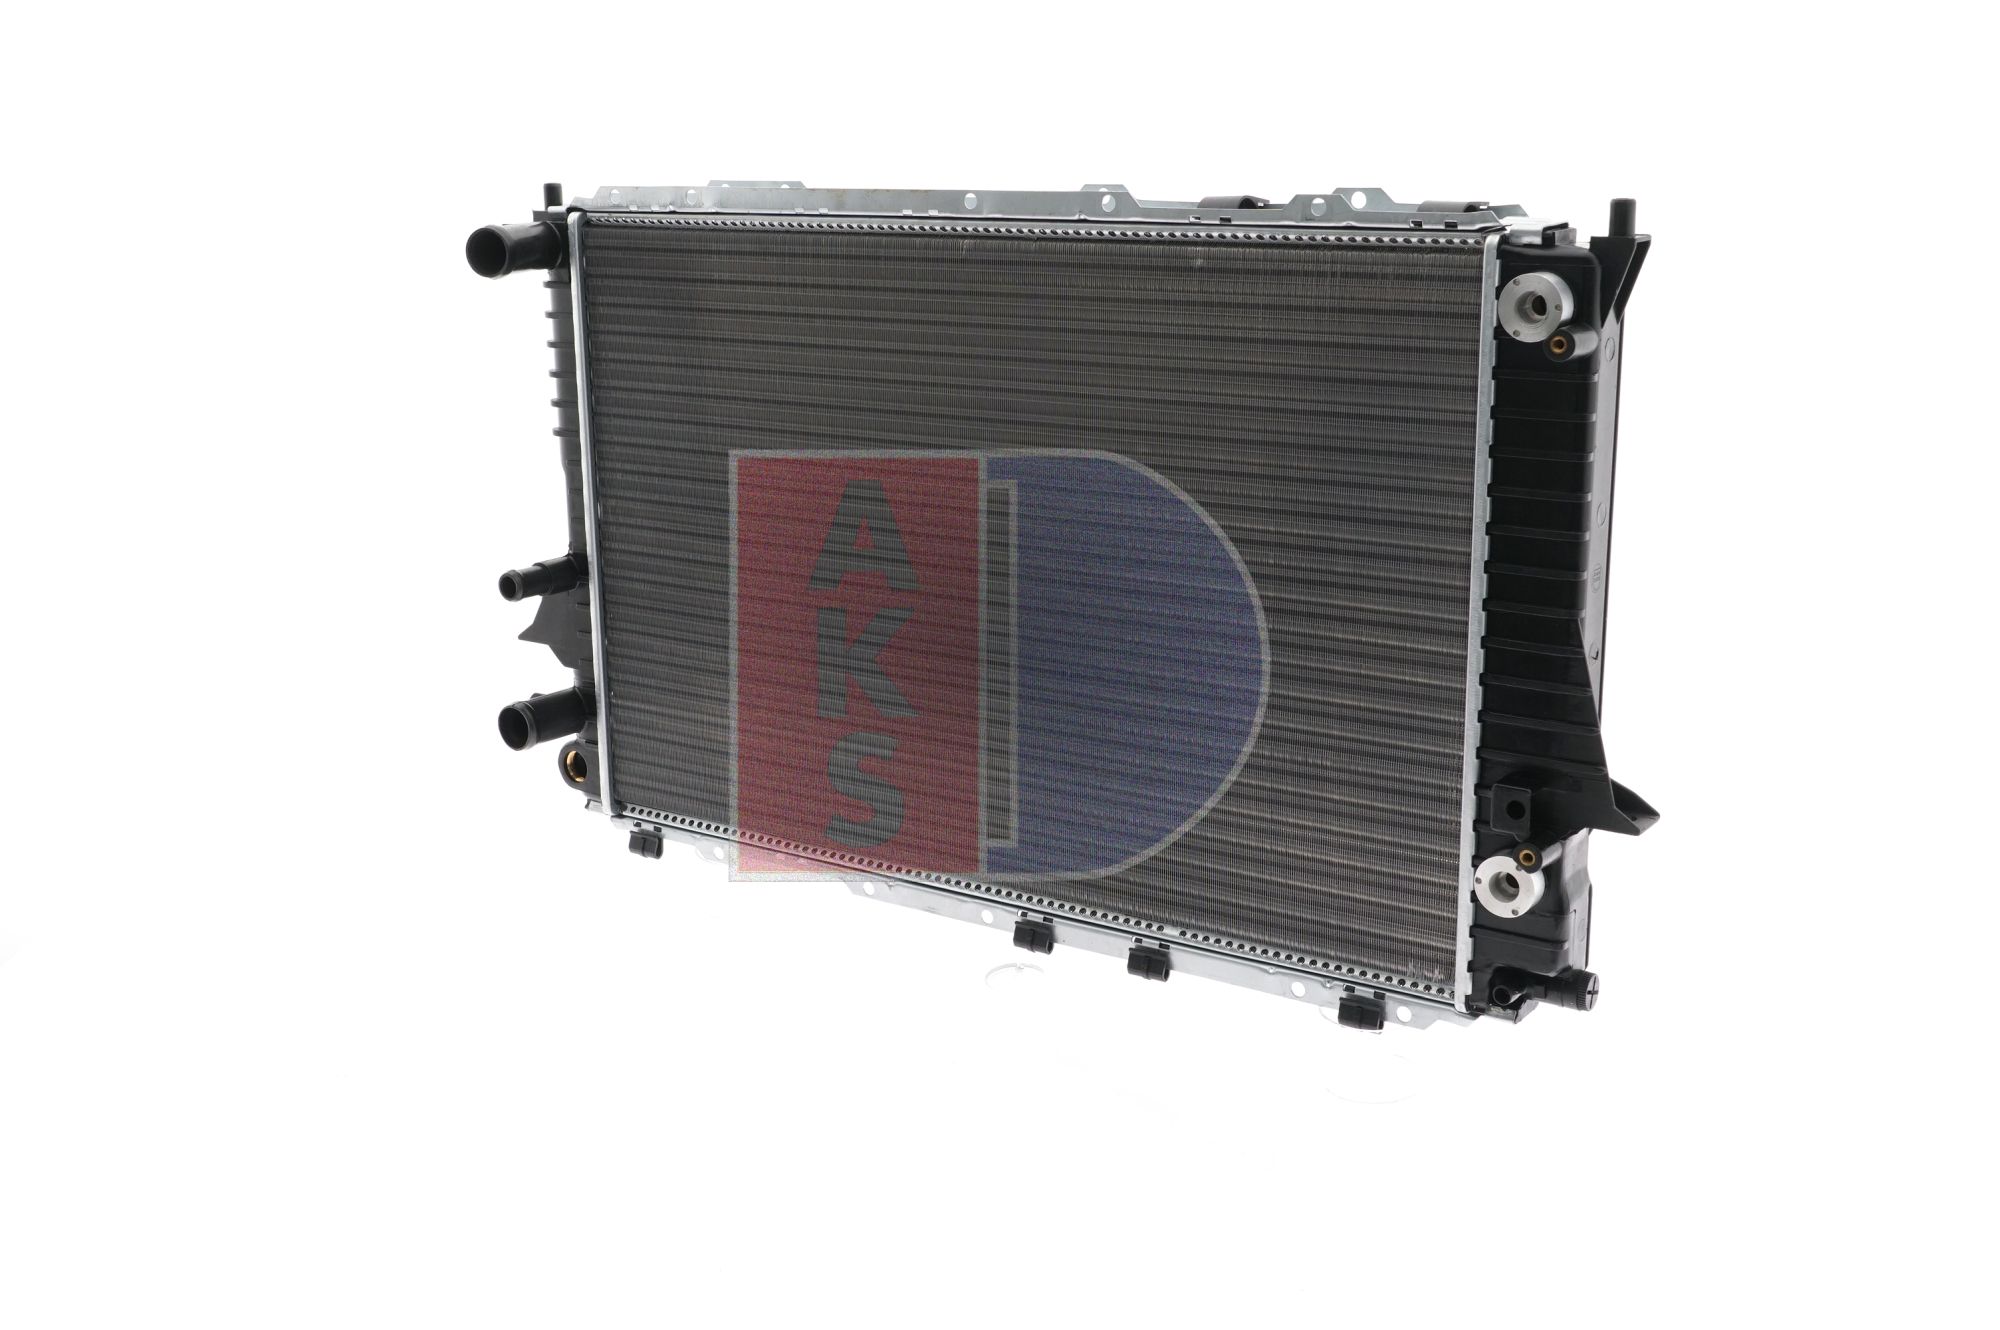 AKS DASIS 481180N Engine radiator 632 x 411 x 30 mm, Mechanically jointed cooling fins